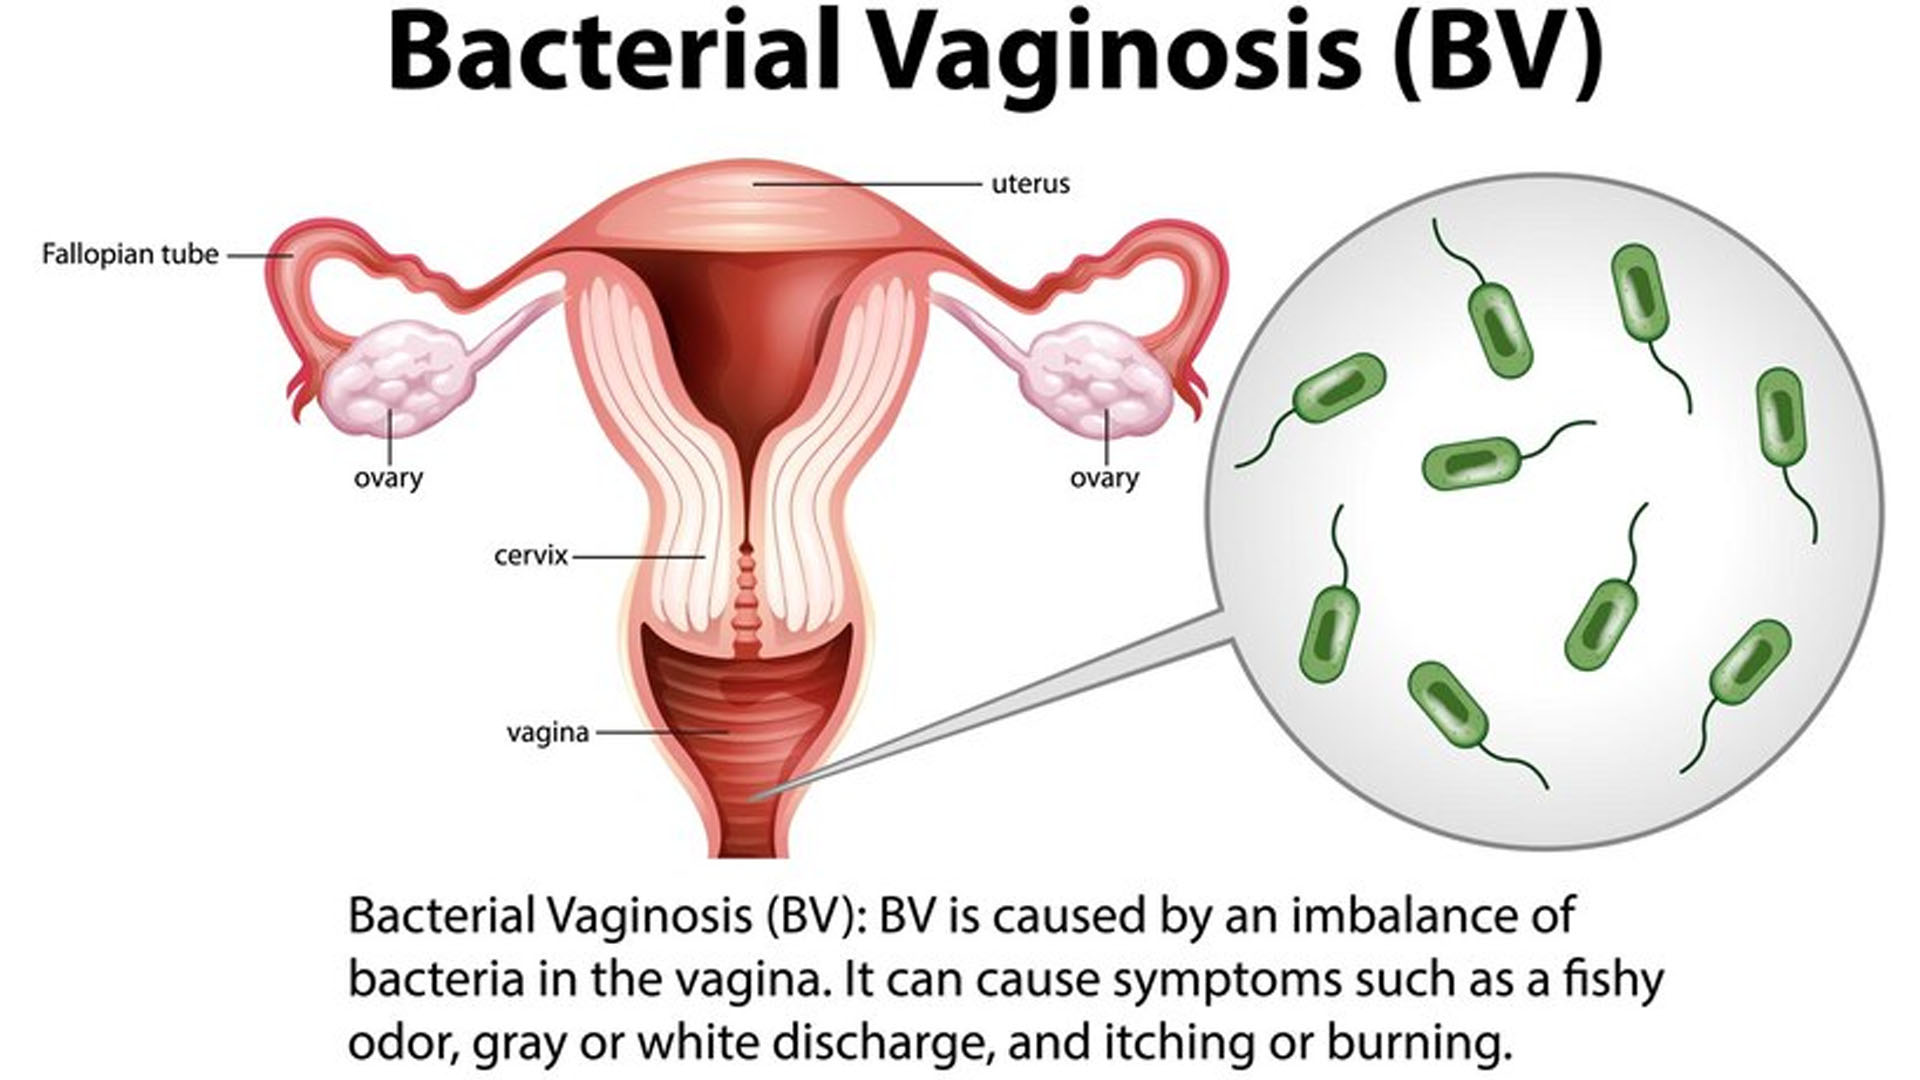 What are the Home Remedies for Bacterial Vaginosis?